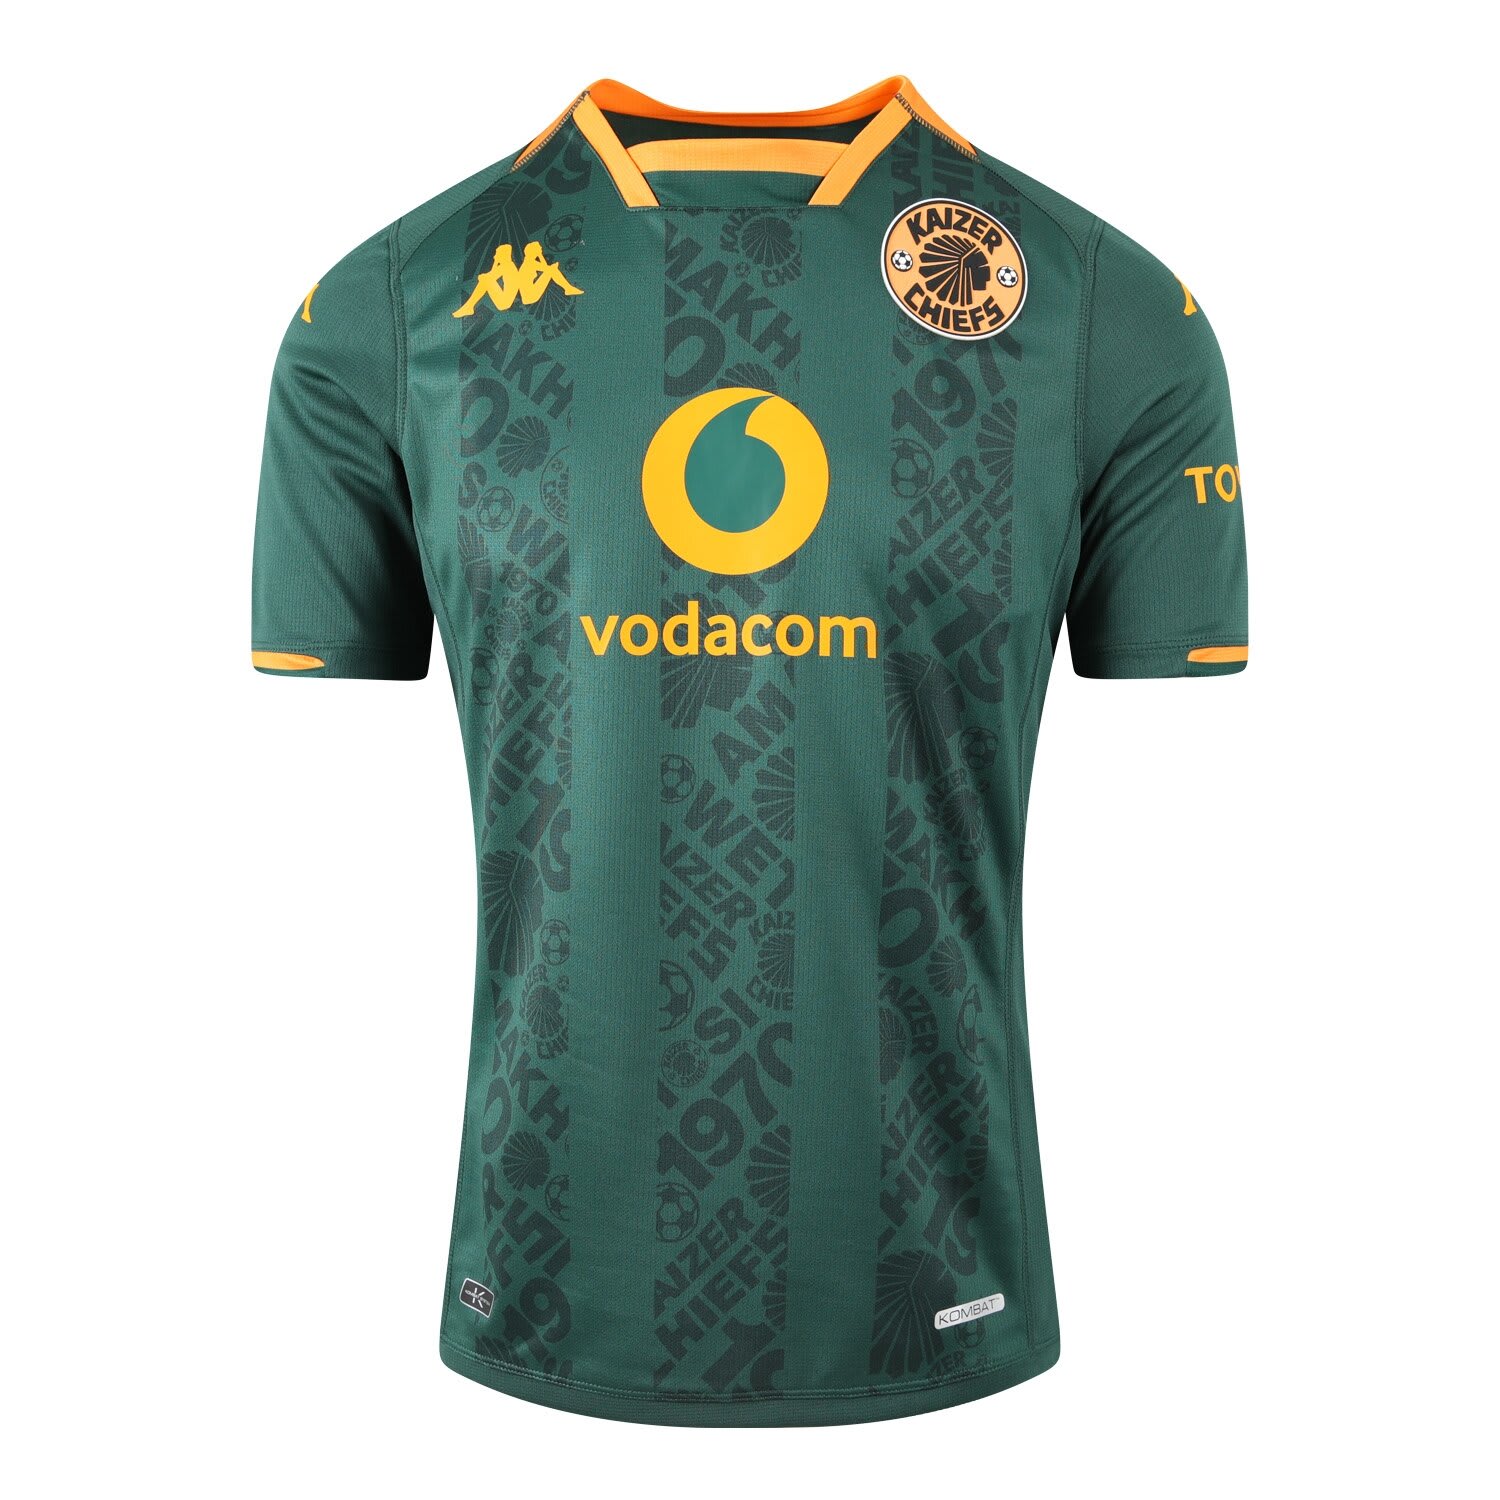 KAIZER CHIEFS 23-24 HOME KIT This is the Kaizer Chiefs F.C. 2023